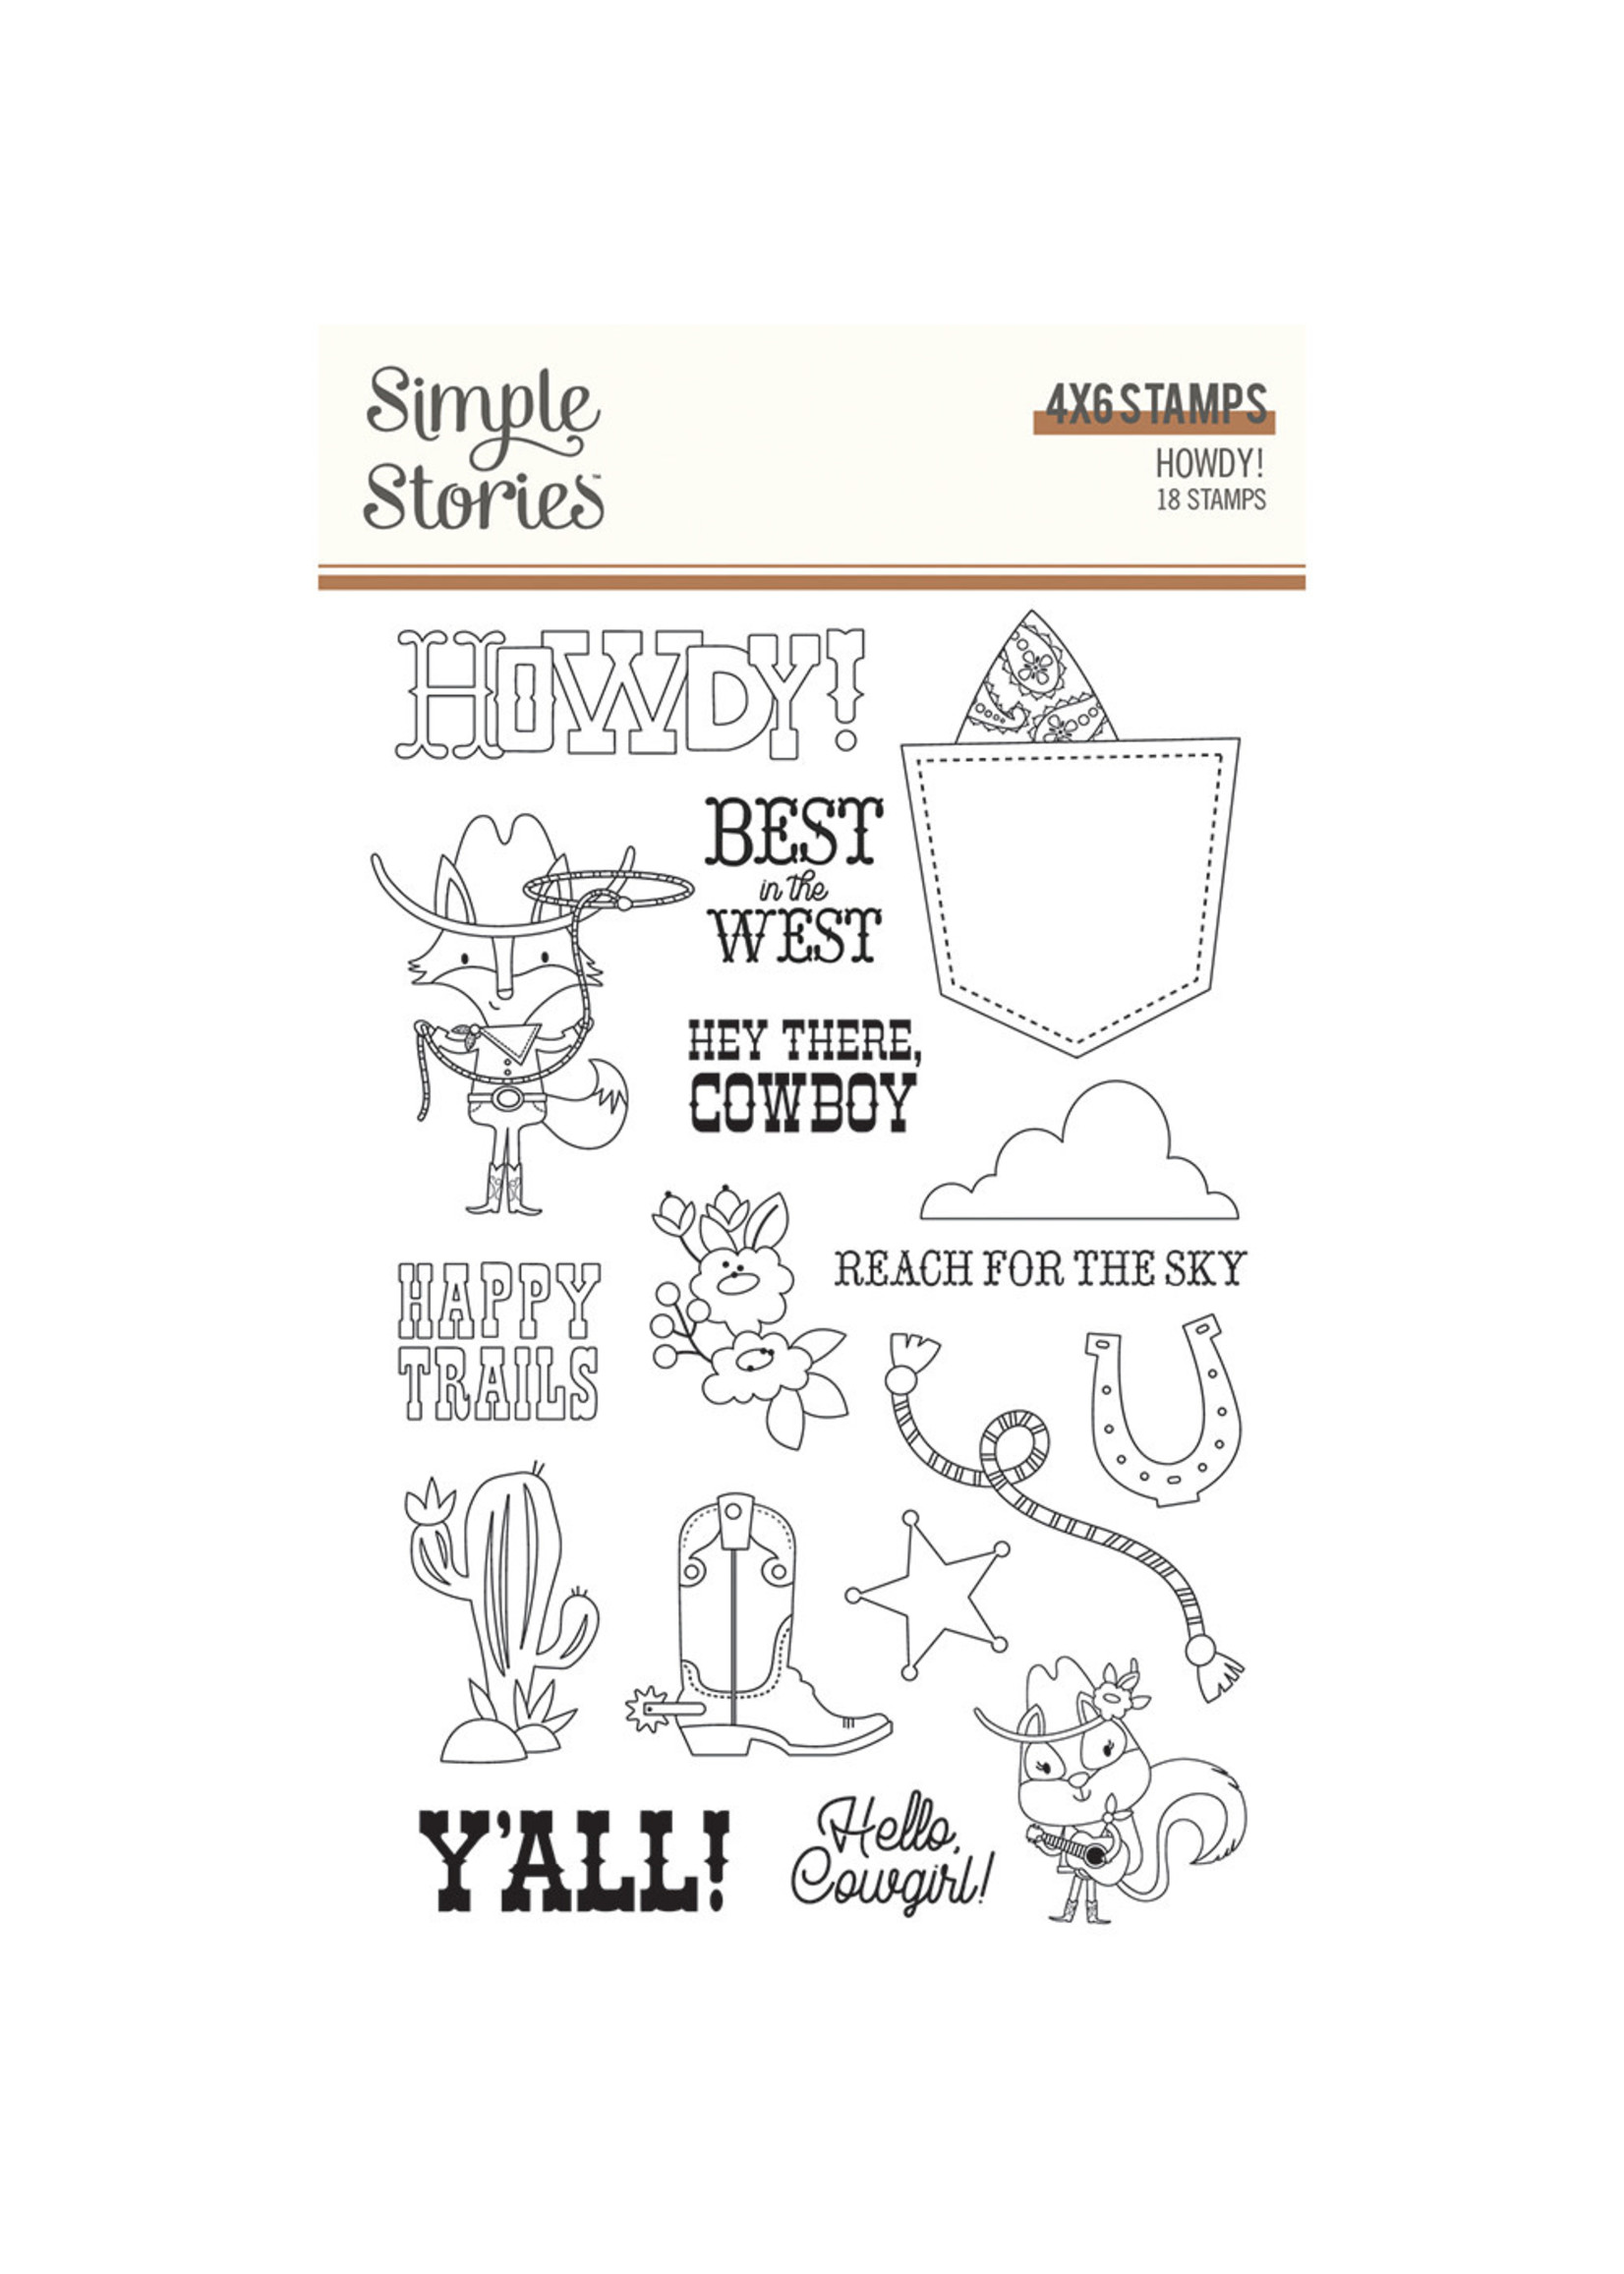 Simple Stories Howdy! - Stamps